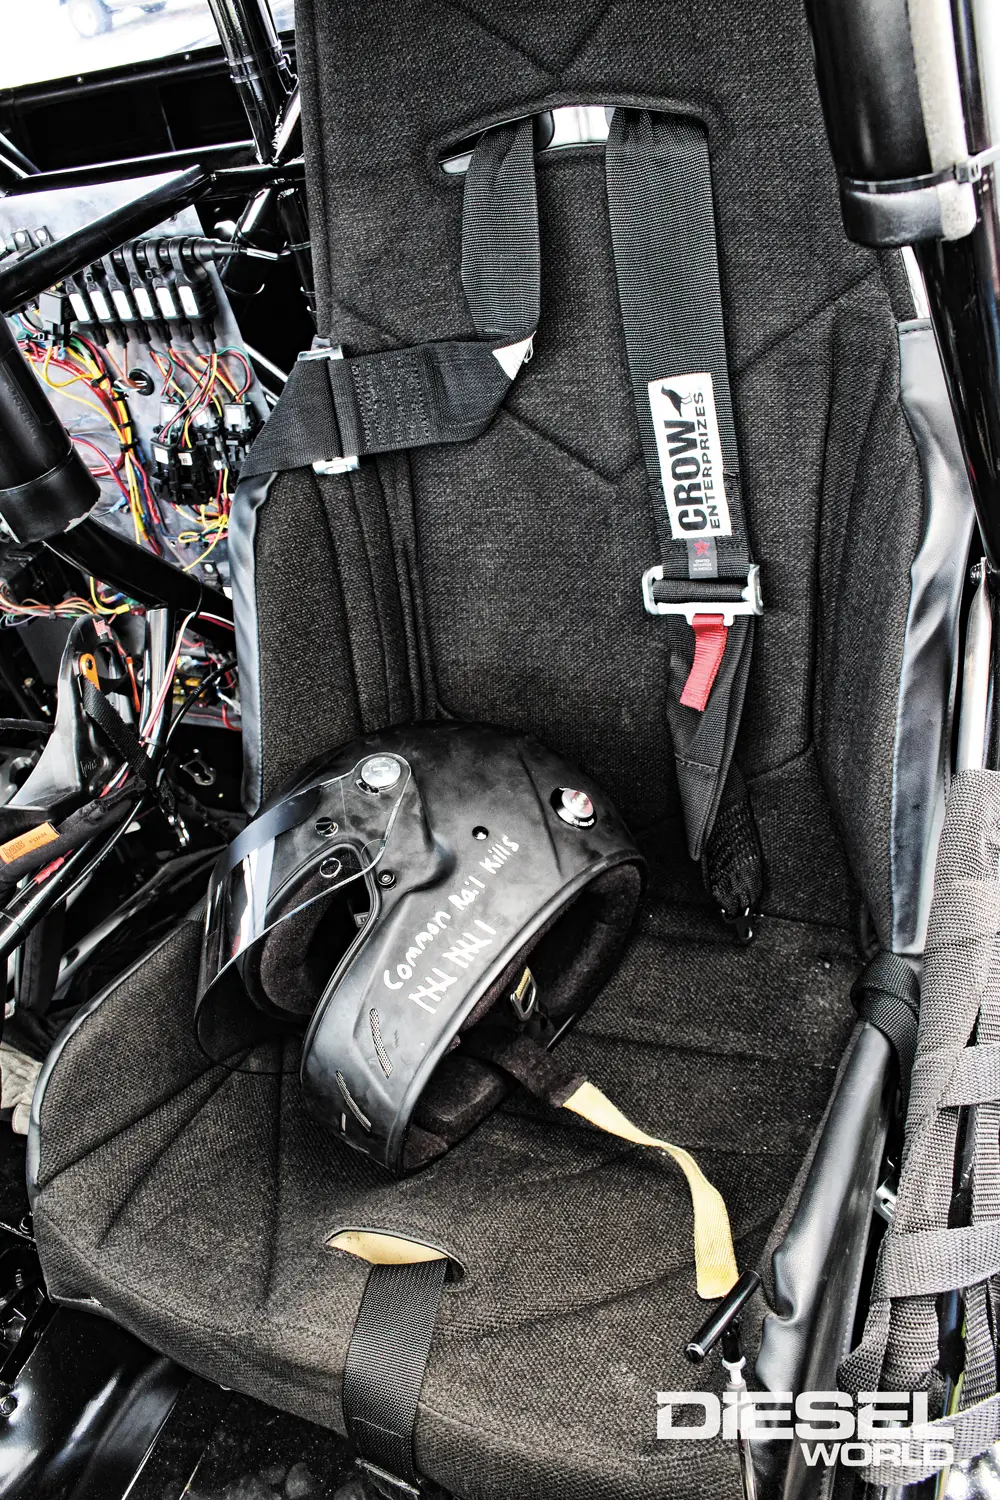 55 series Pro Street Drag seat from Kirkey Racing with Crow Enterprizes 5-way restraint